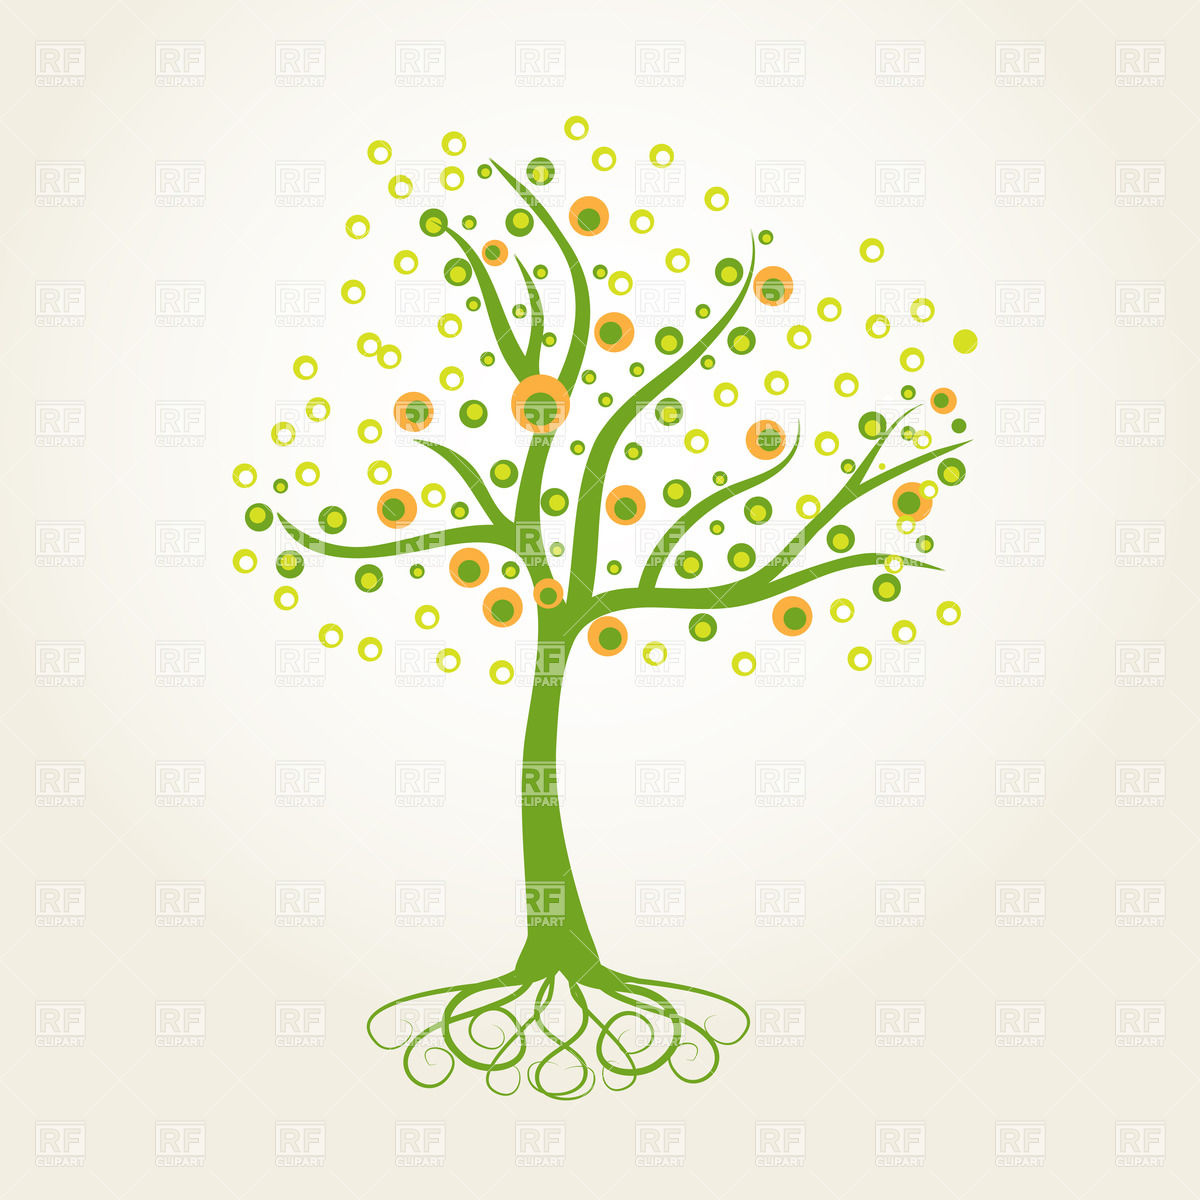 Tree With Curly Roots 22187 Download Royalty Free Vector Clipart